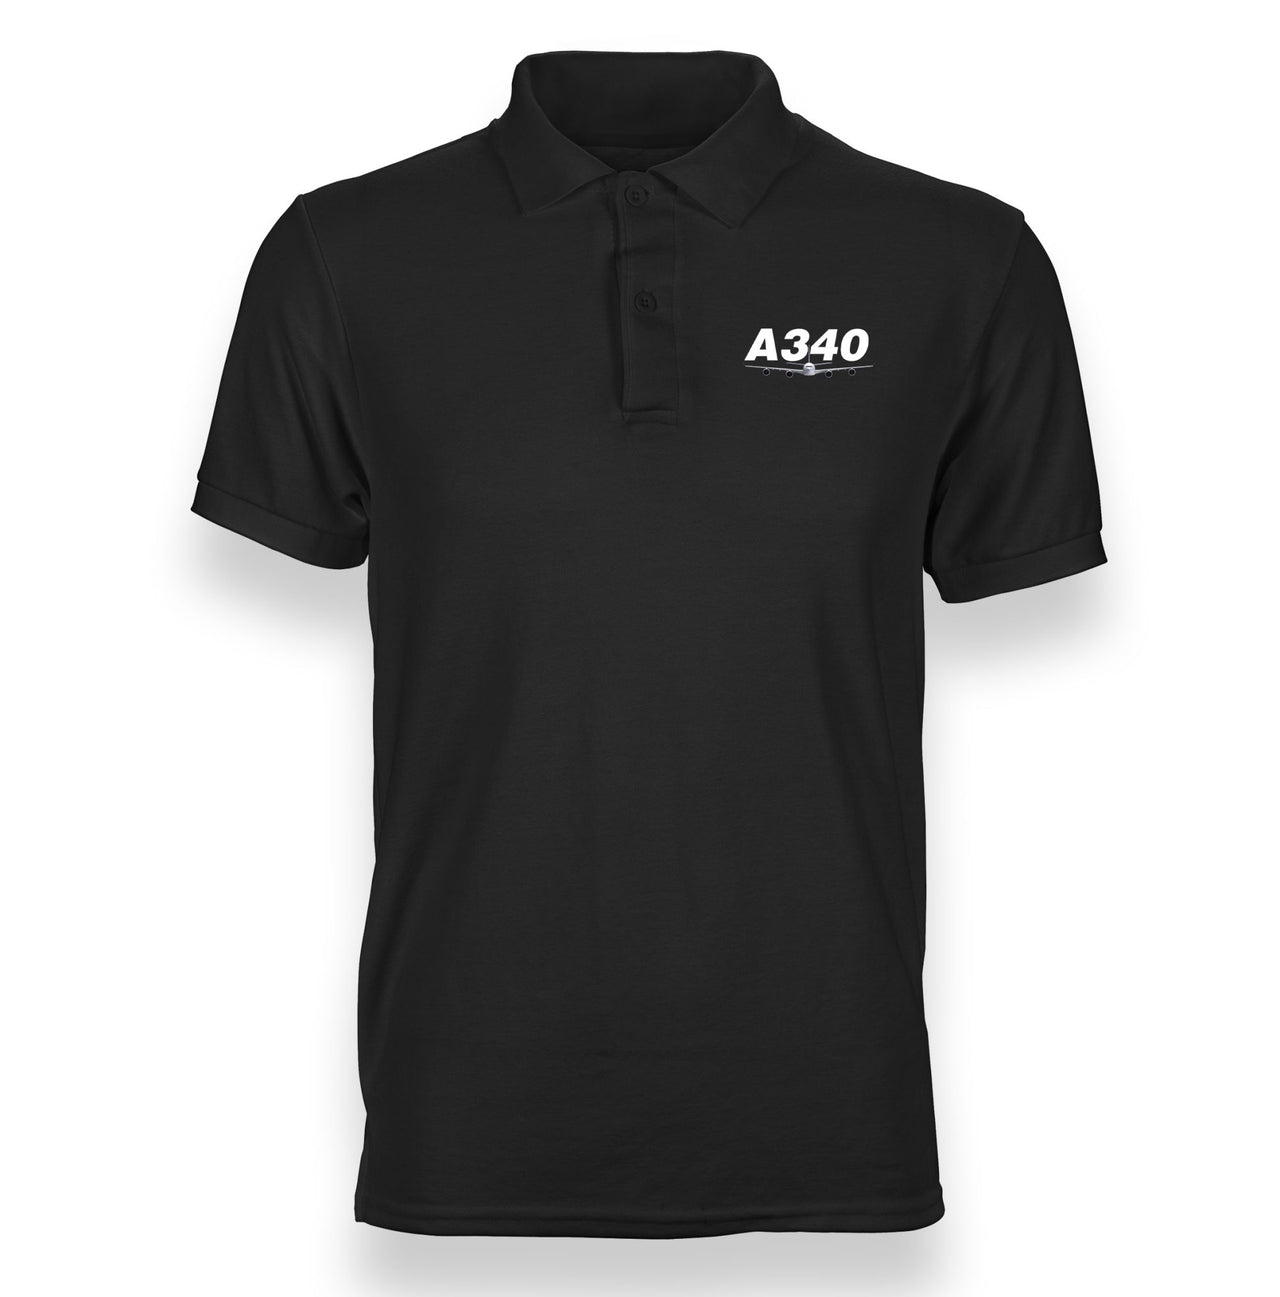 Super Airbus A340 Designed "WOMEN" Polo T-Shirts